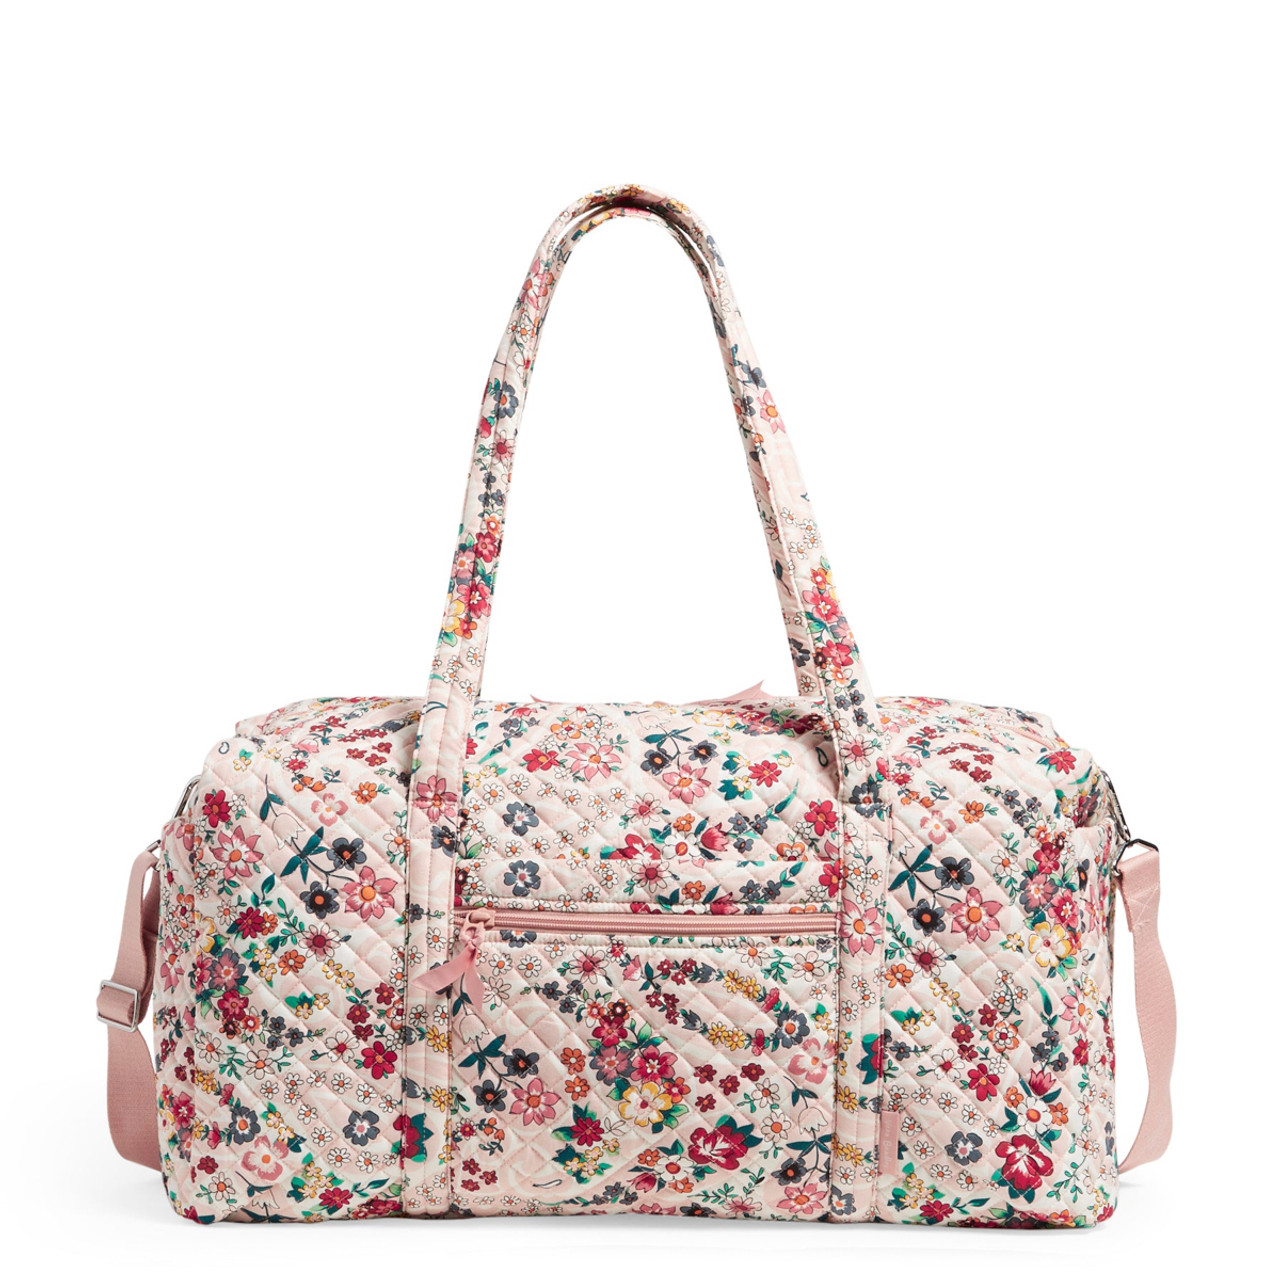 Vera Bradley Jazzy Blooms Quilted Floral Diaper/Duffel Travel Bag